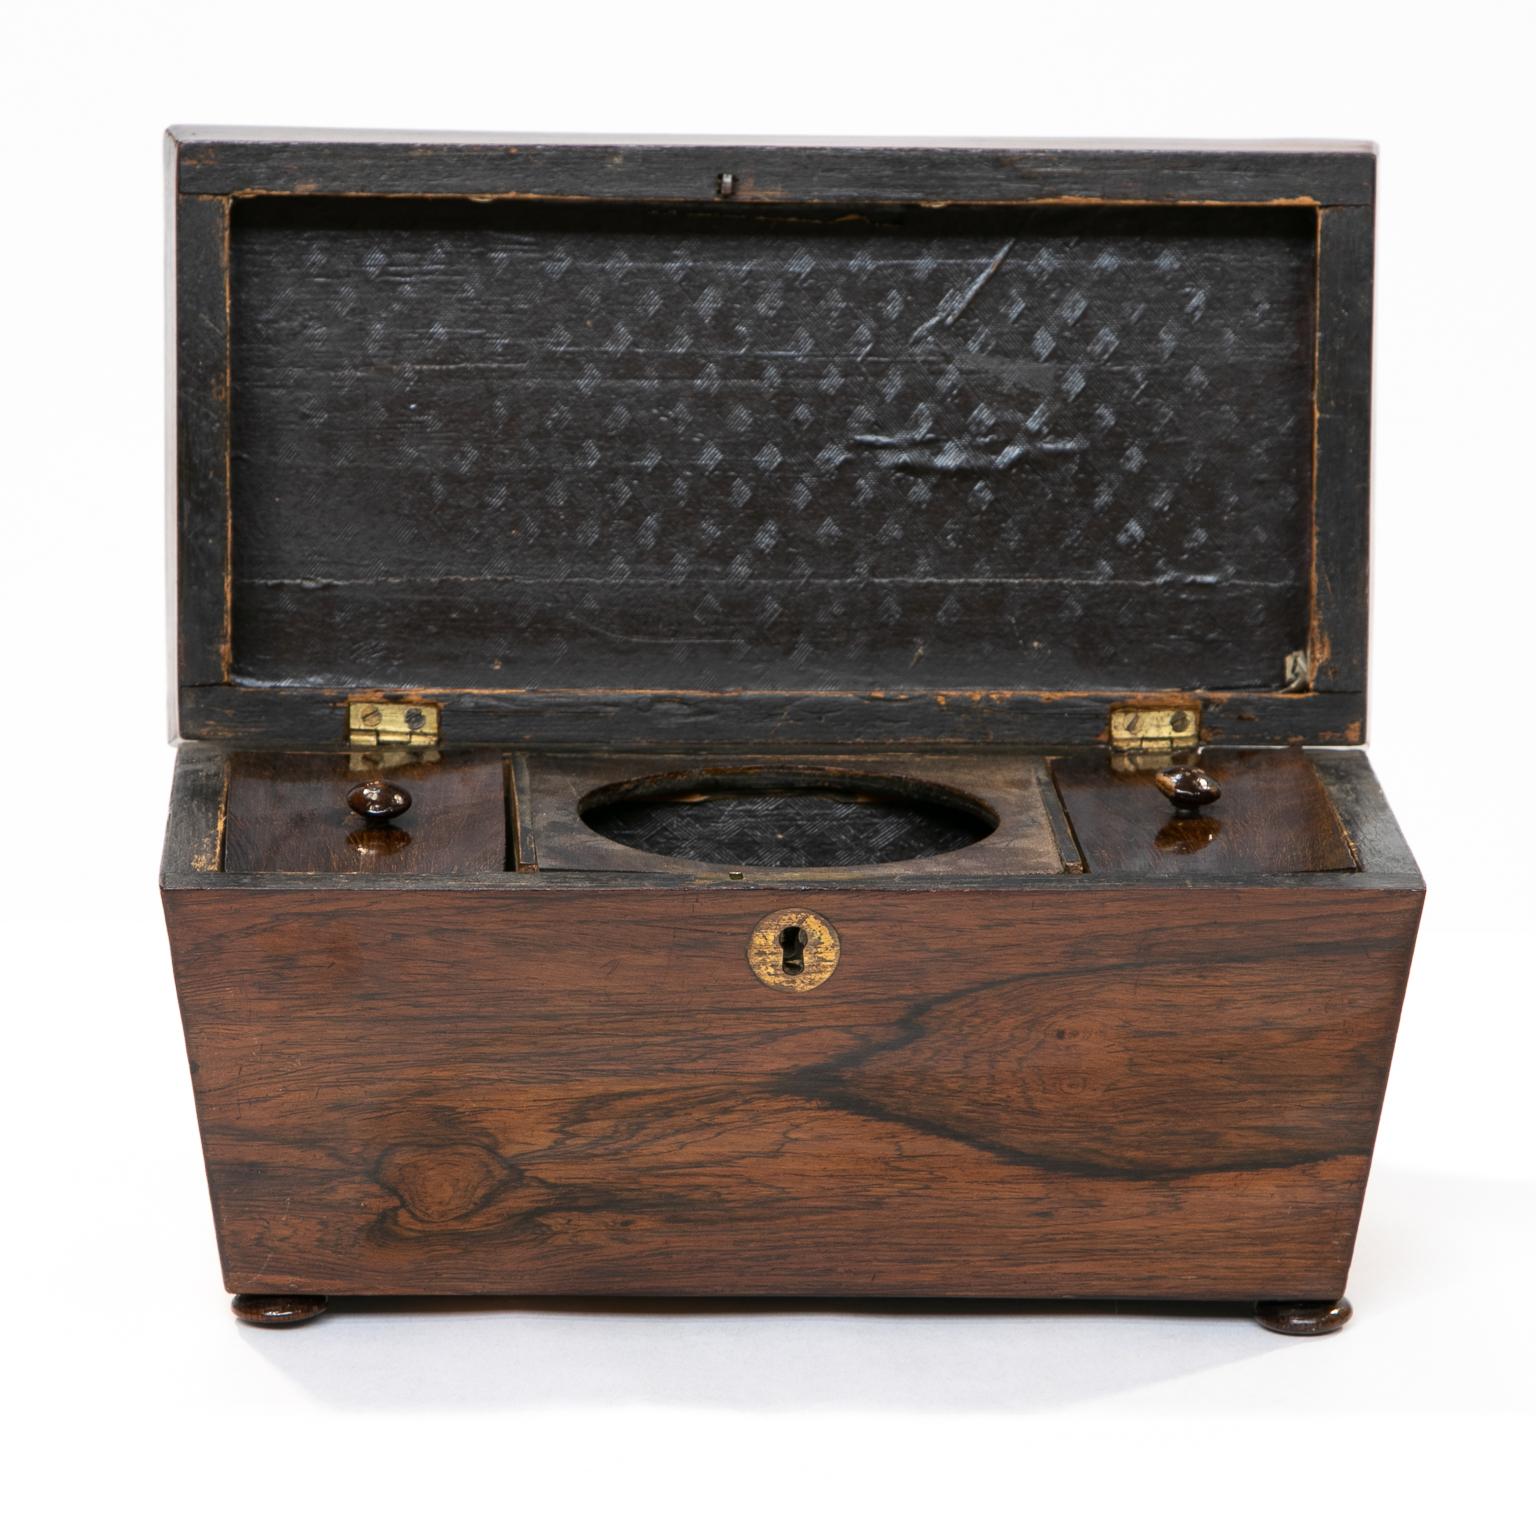 19th century Regency rosewood sarcophagus tea caddy

A tea caddy made of rosewood and in the sarcophagus shape. Fitted with two tea compartments and coverings but missing the waste bowel. Resting on small bun feet. 


            